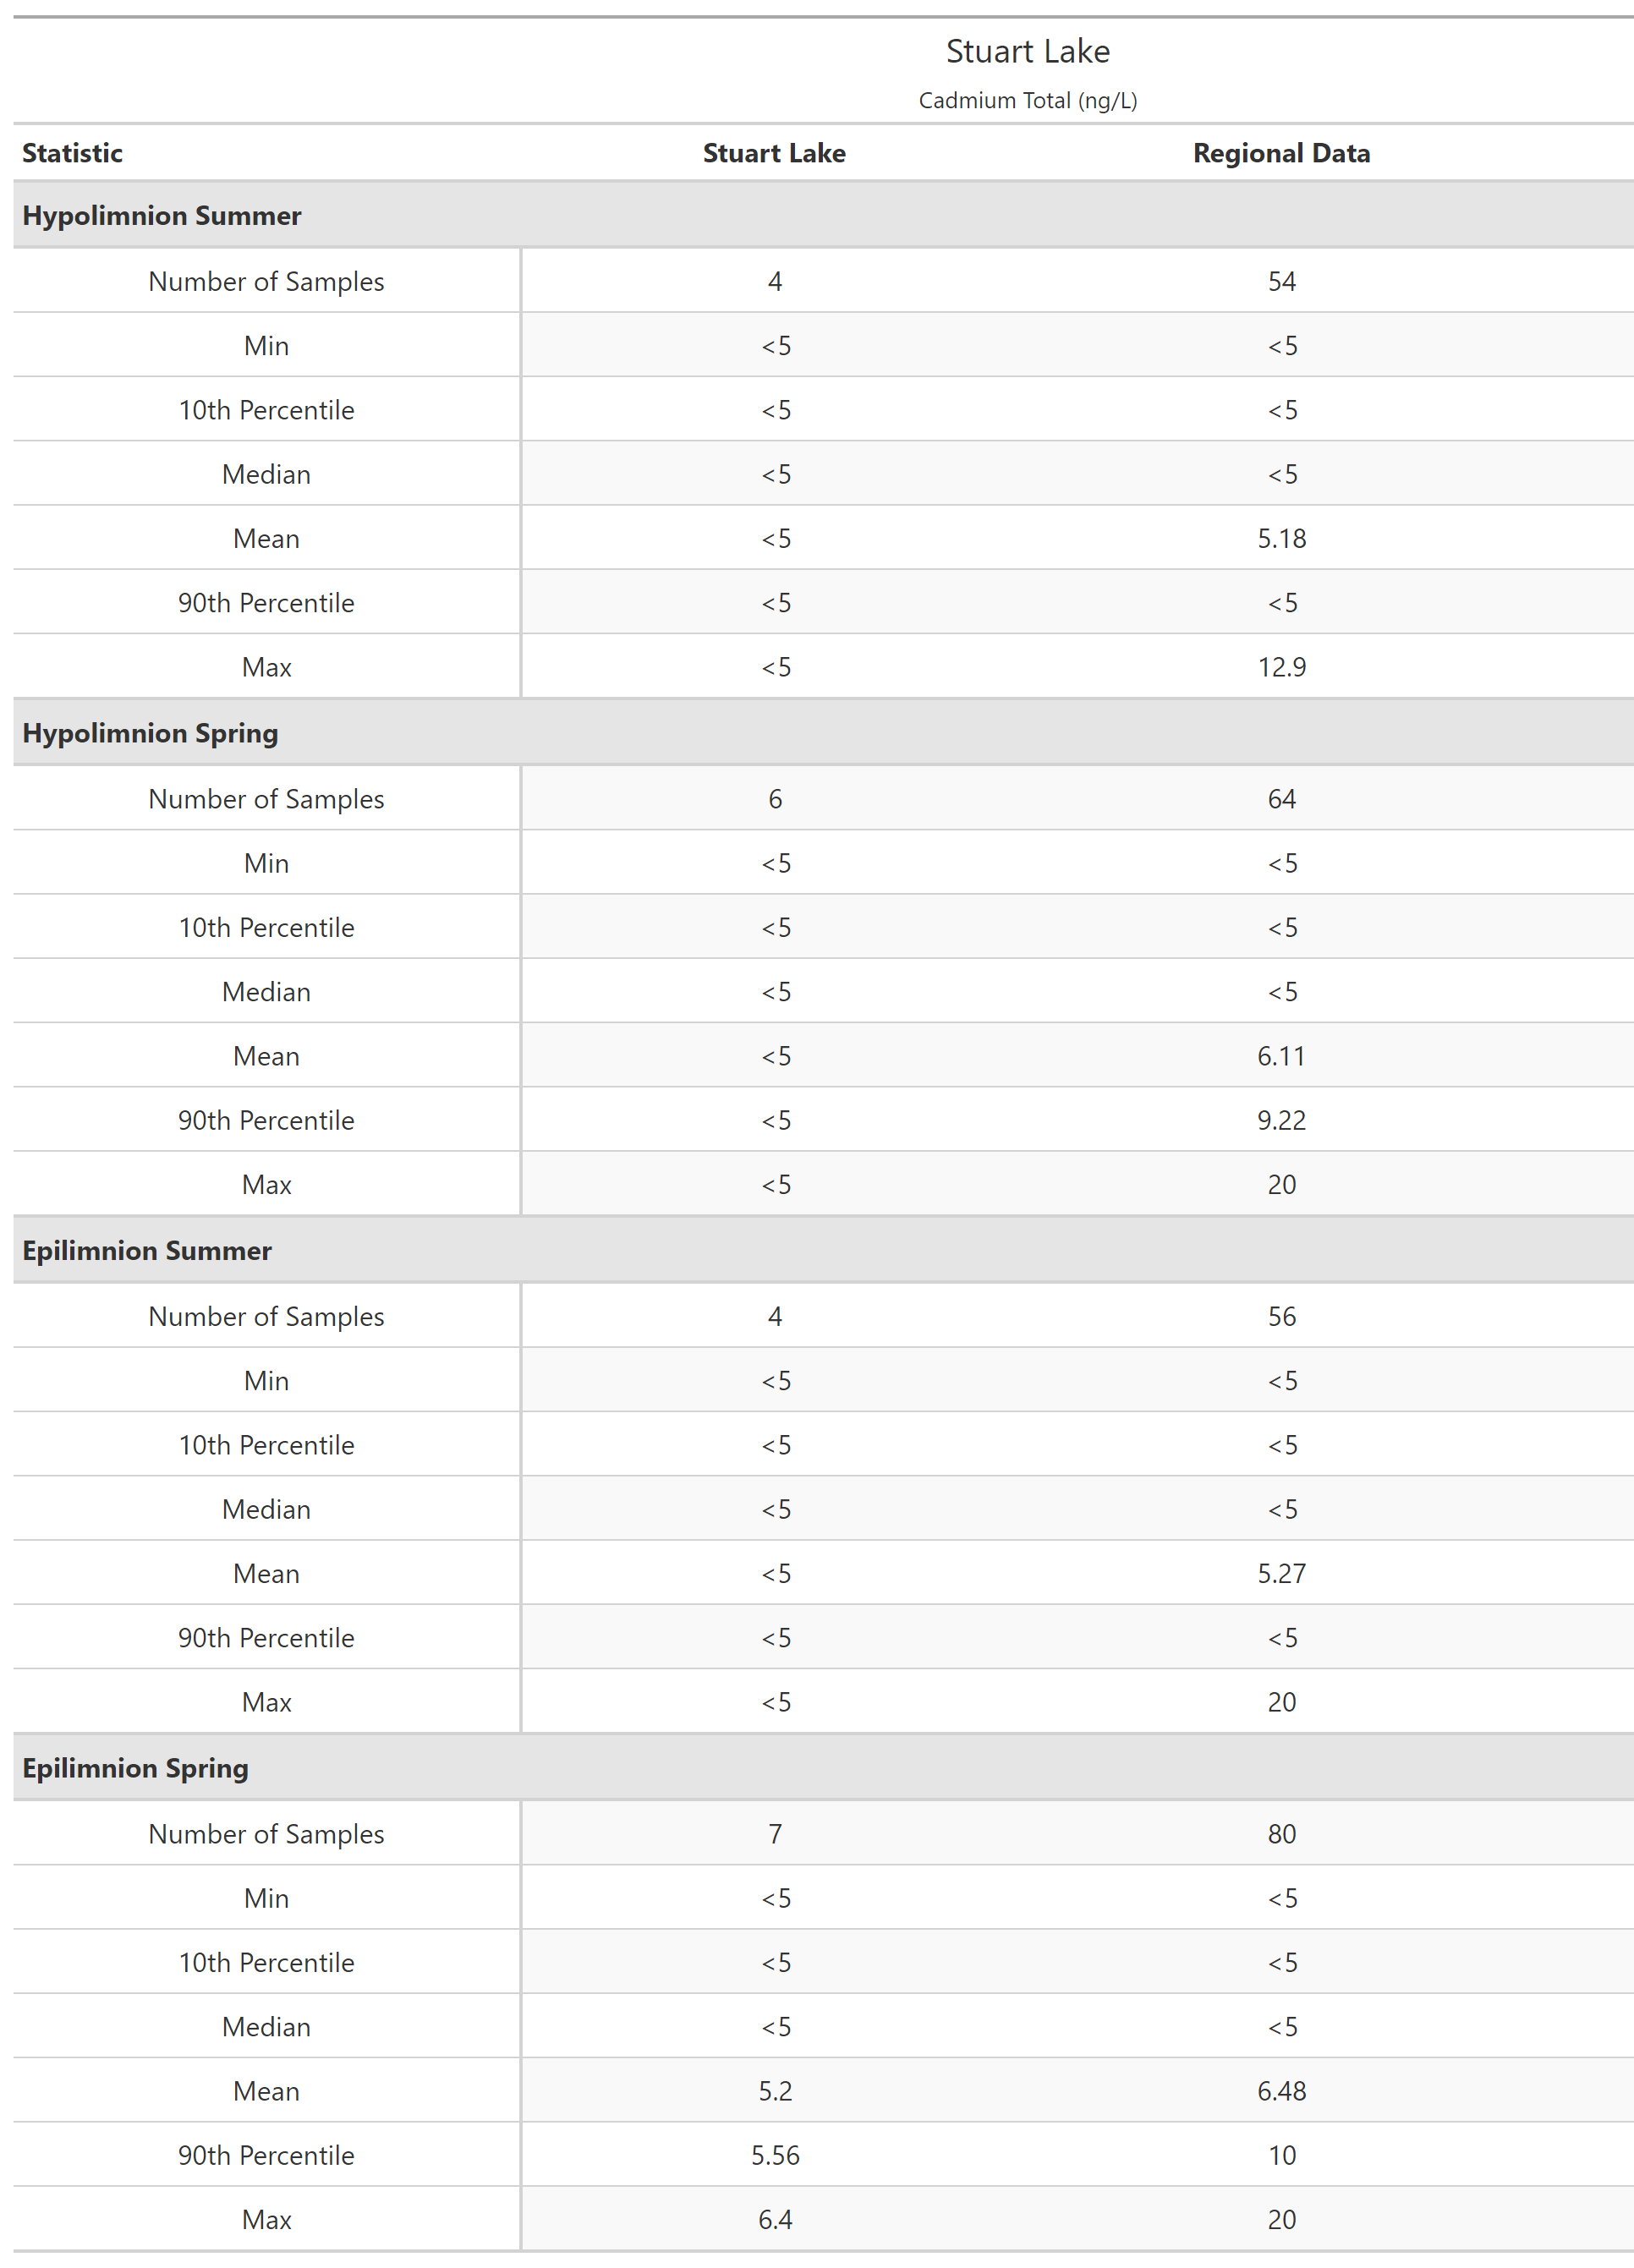 A table of summary statistics for Cadmium Total with comparison to regional data